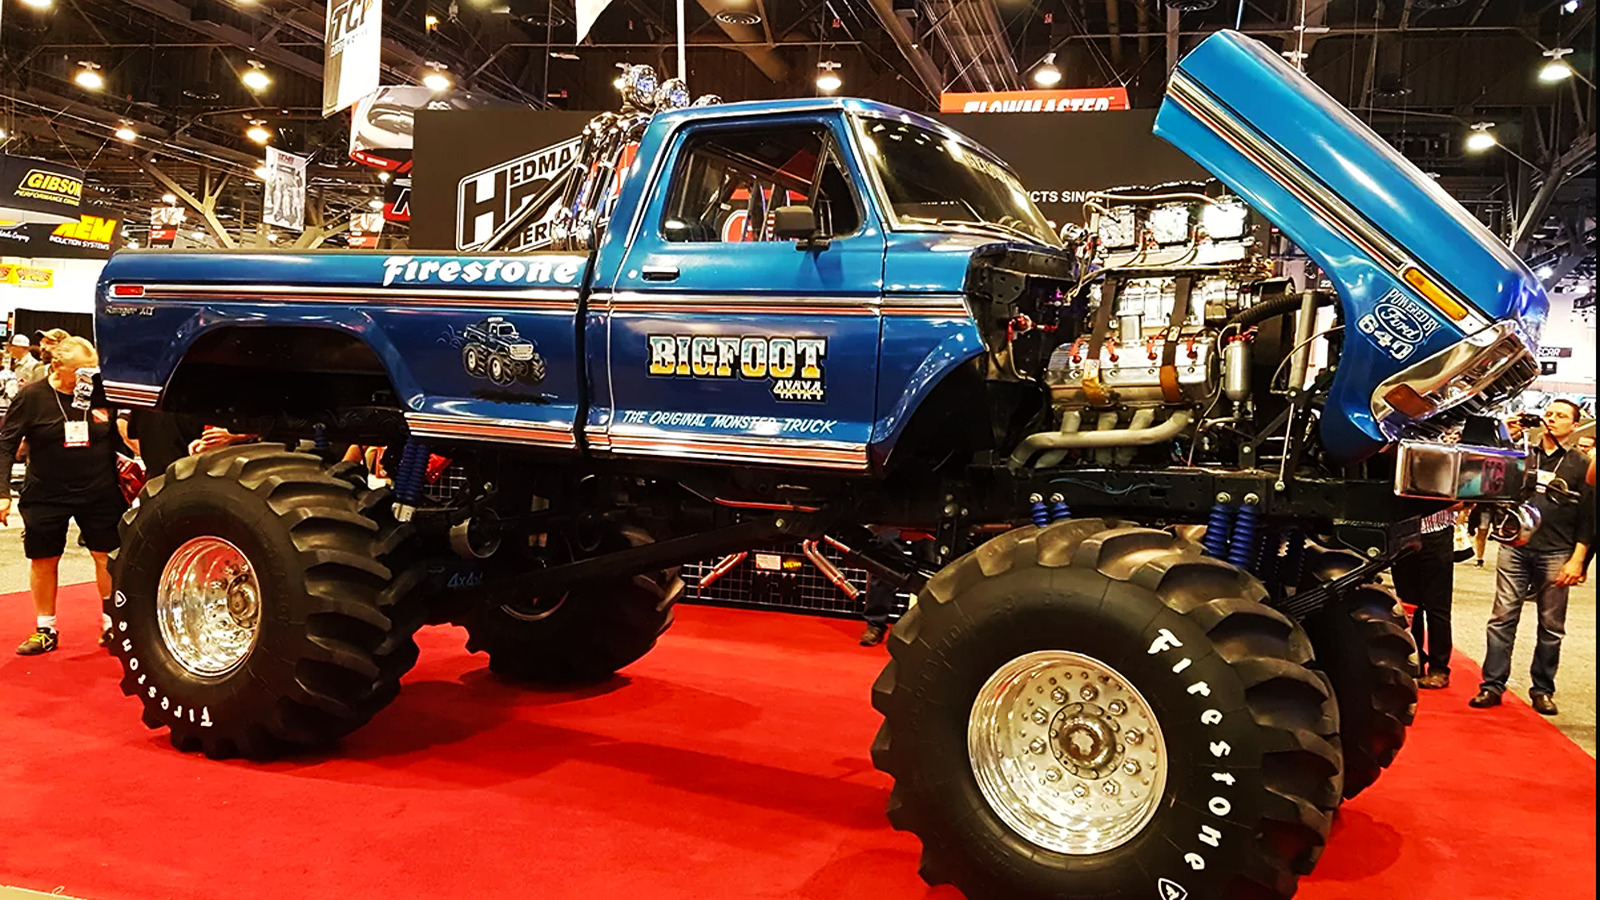 Ford Bigfoot 1. ЗИЛ бигфут. Ford Bigfoot Monster Truck. Ниссан бигфут.